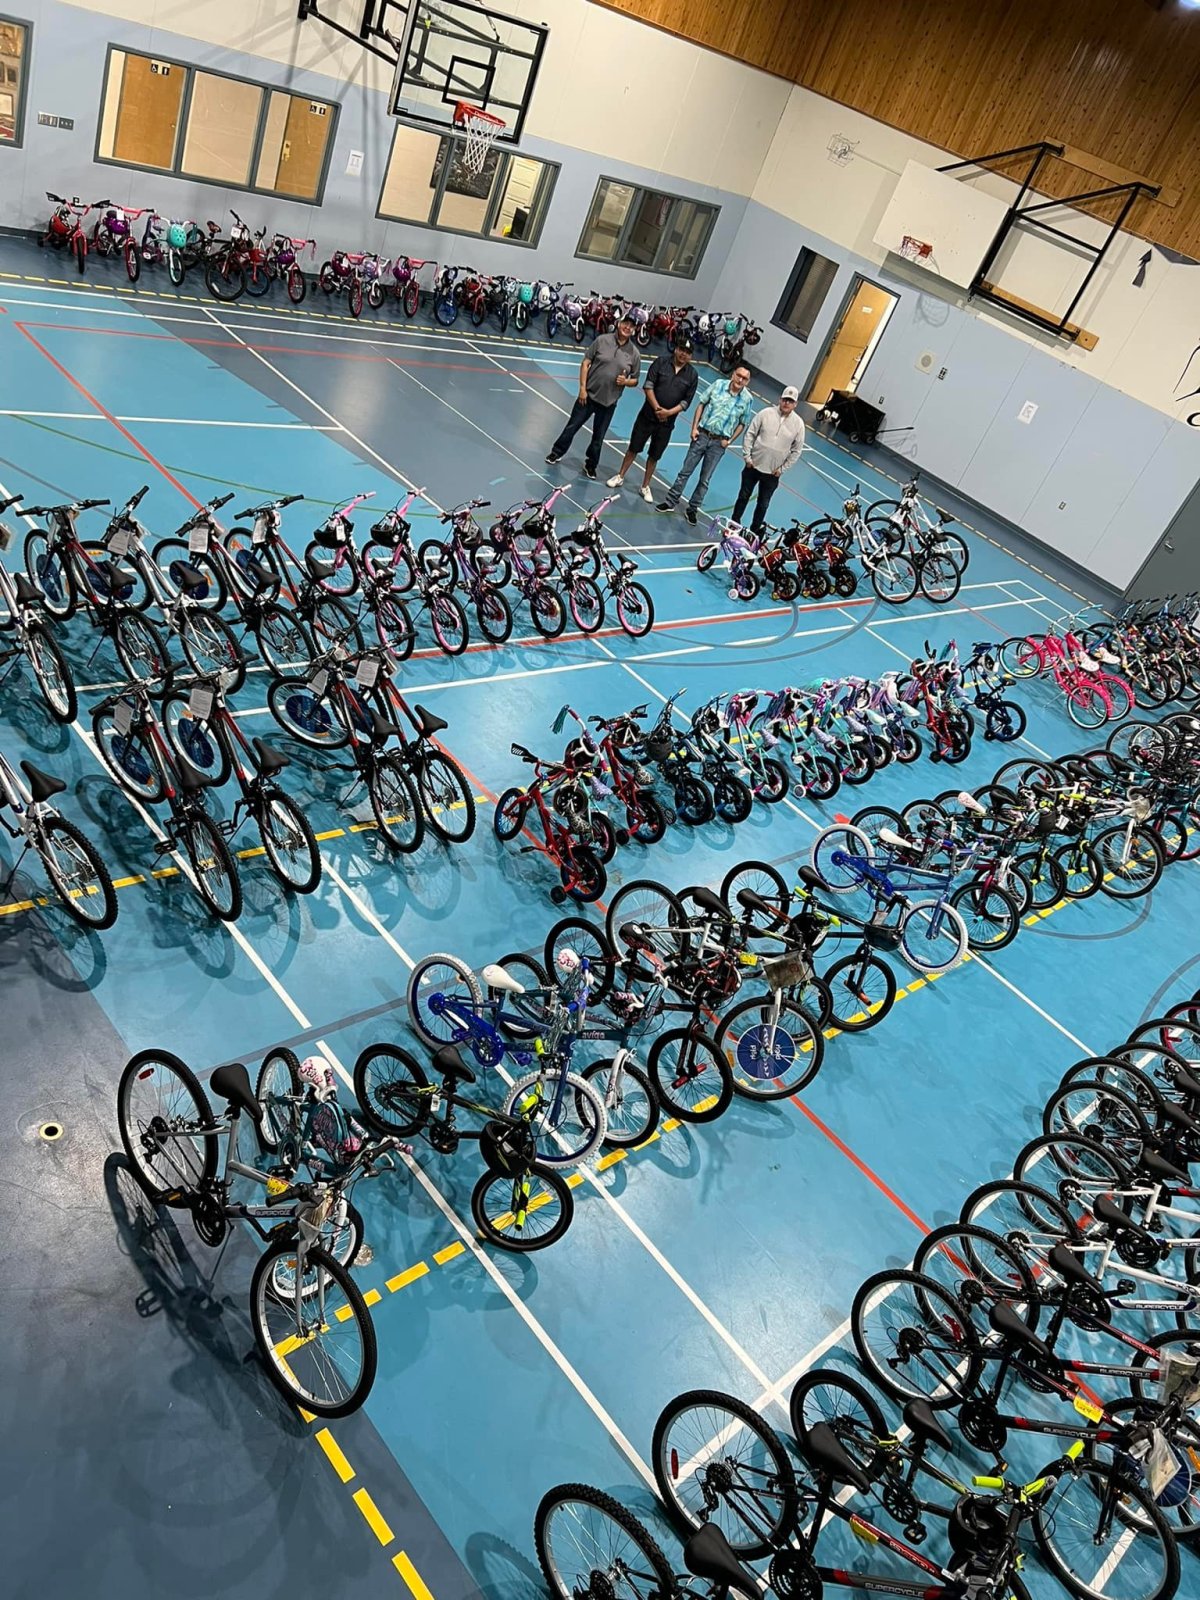 Over 200 brand new bikes were gifted to the students at the Clifford Wuttunee School in Red Pheasant Cree Nation as a reward for making it through the year during the pandemic.